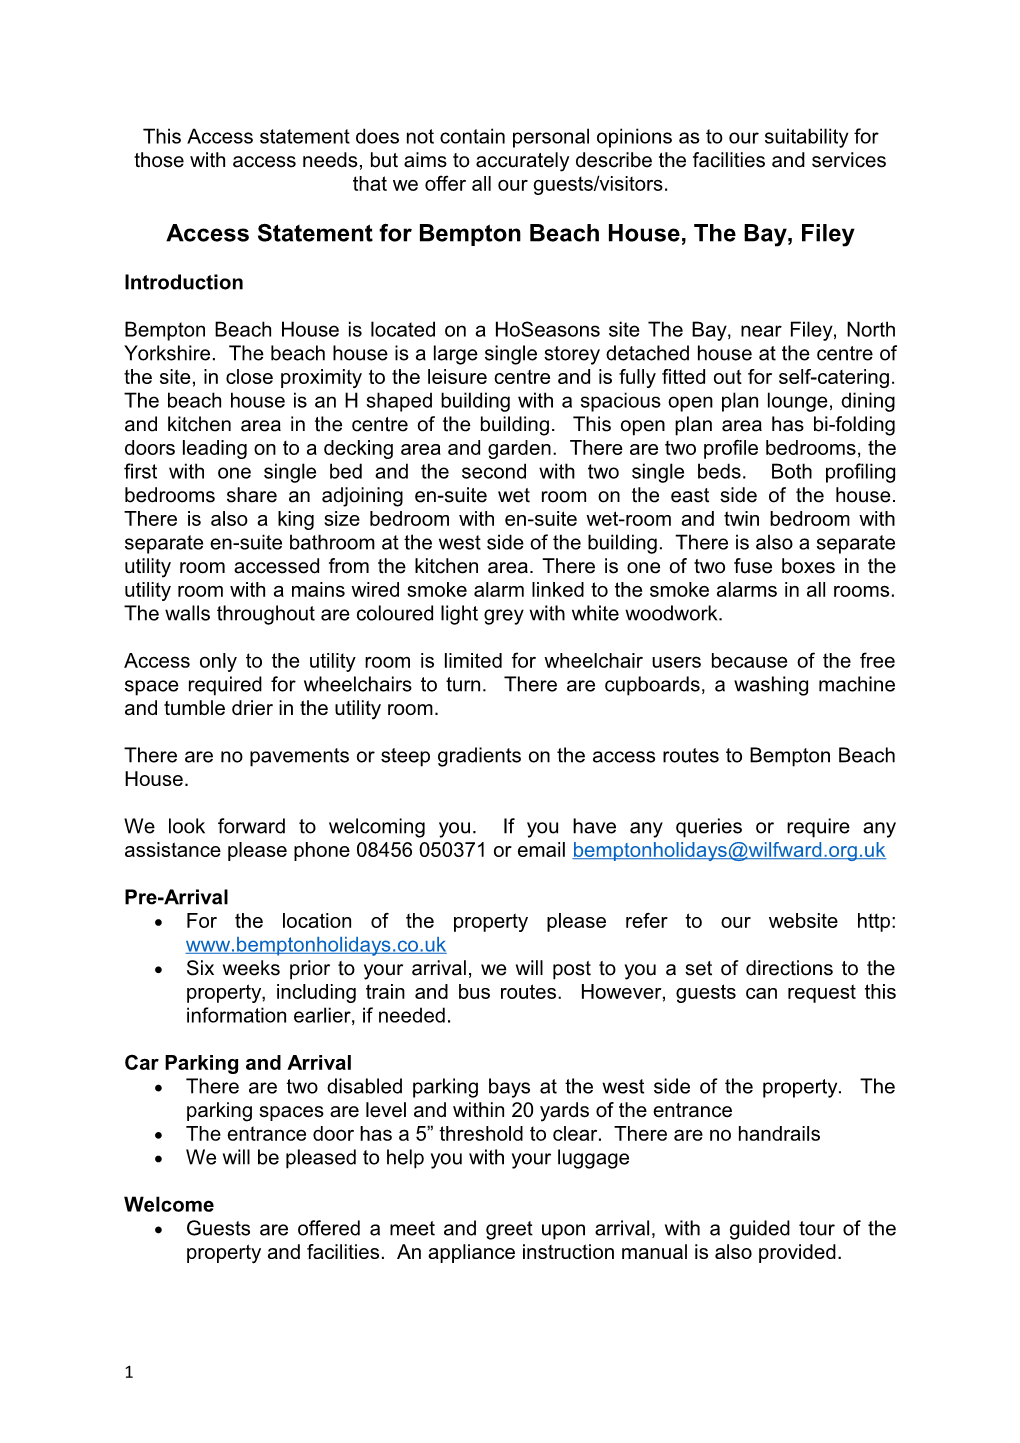 Access Statement for Bemptonbeach House,The Bay,Filey